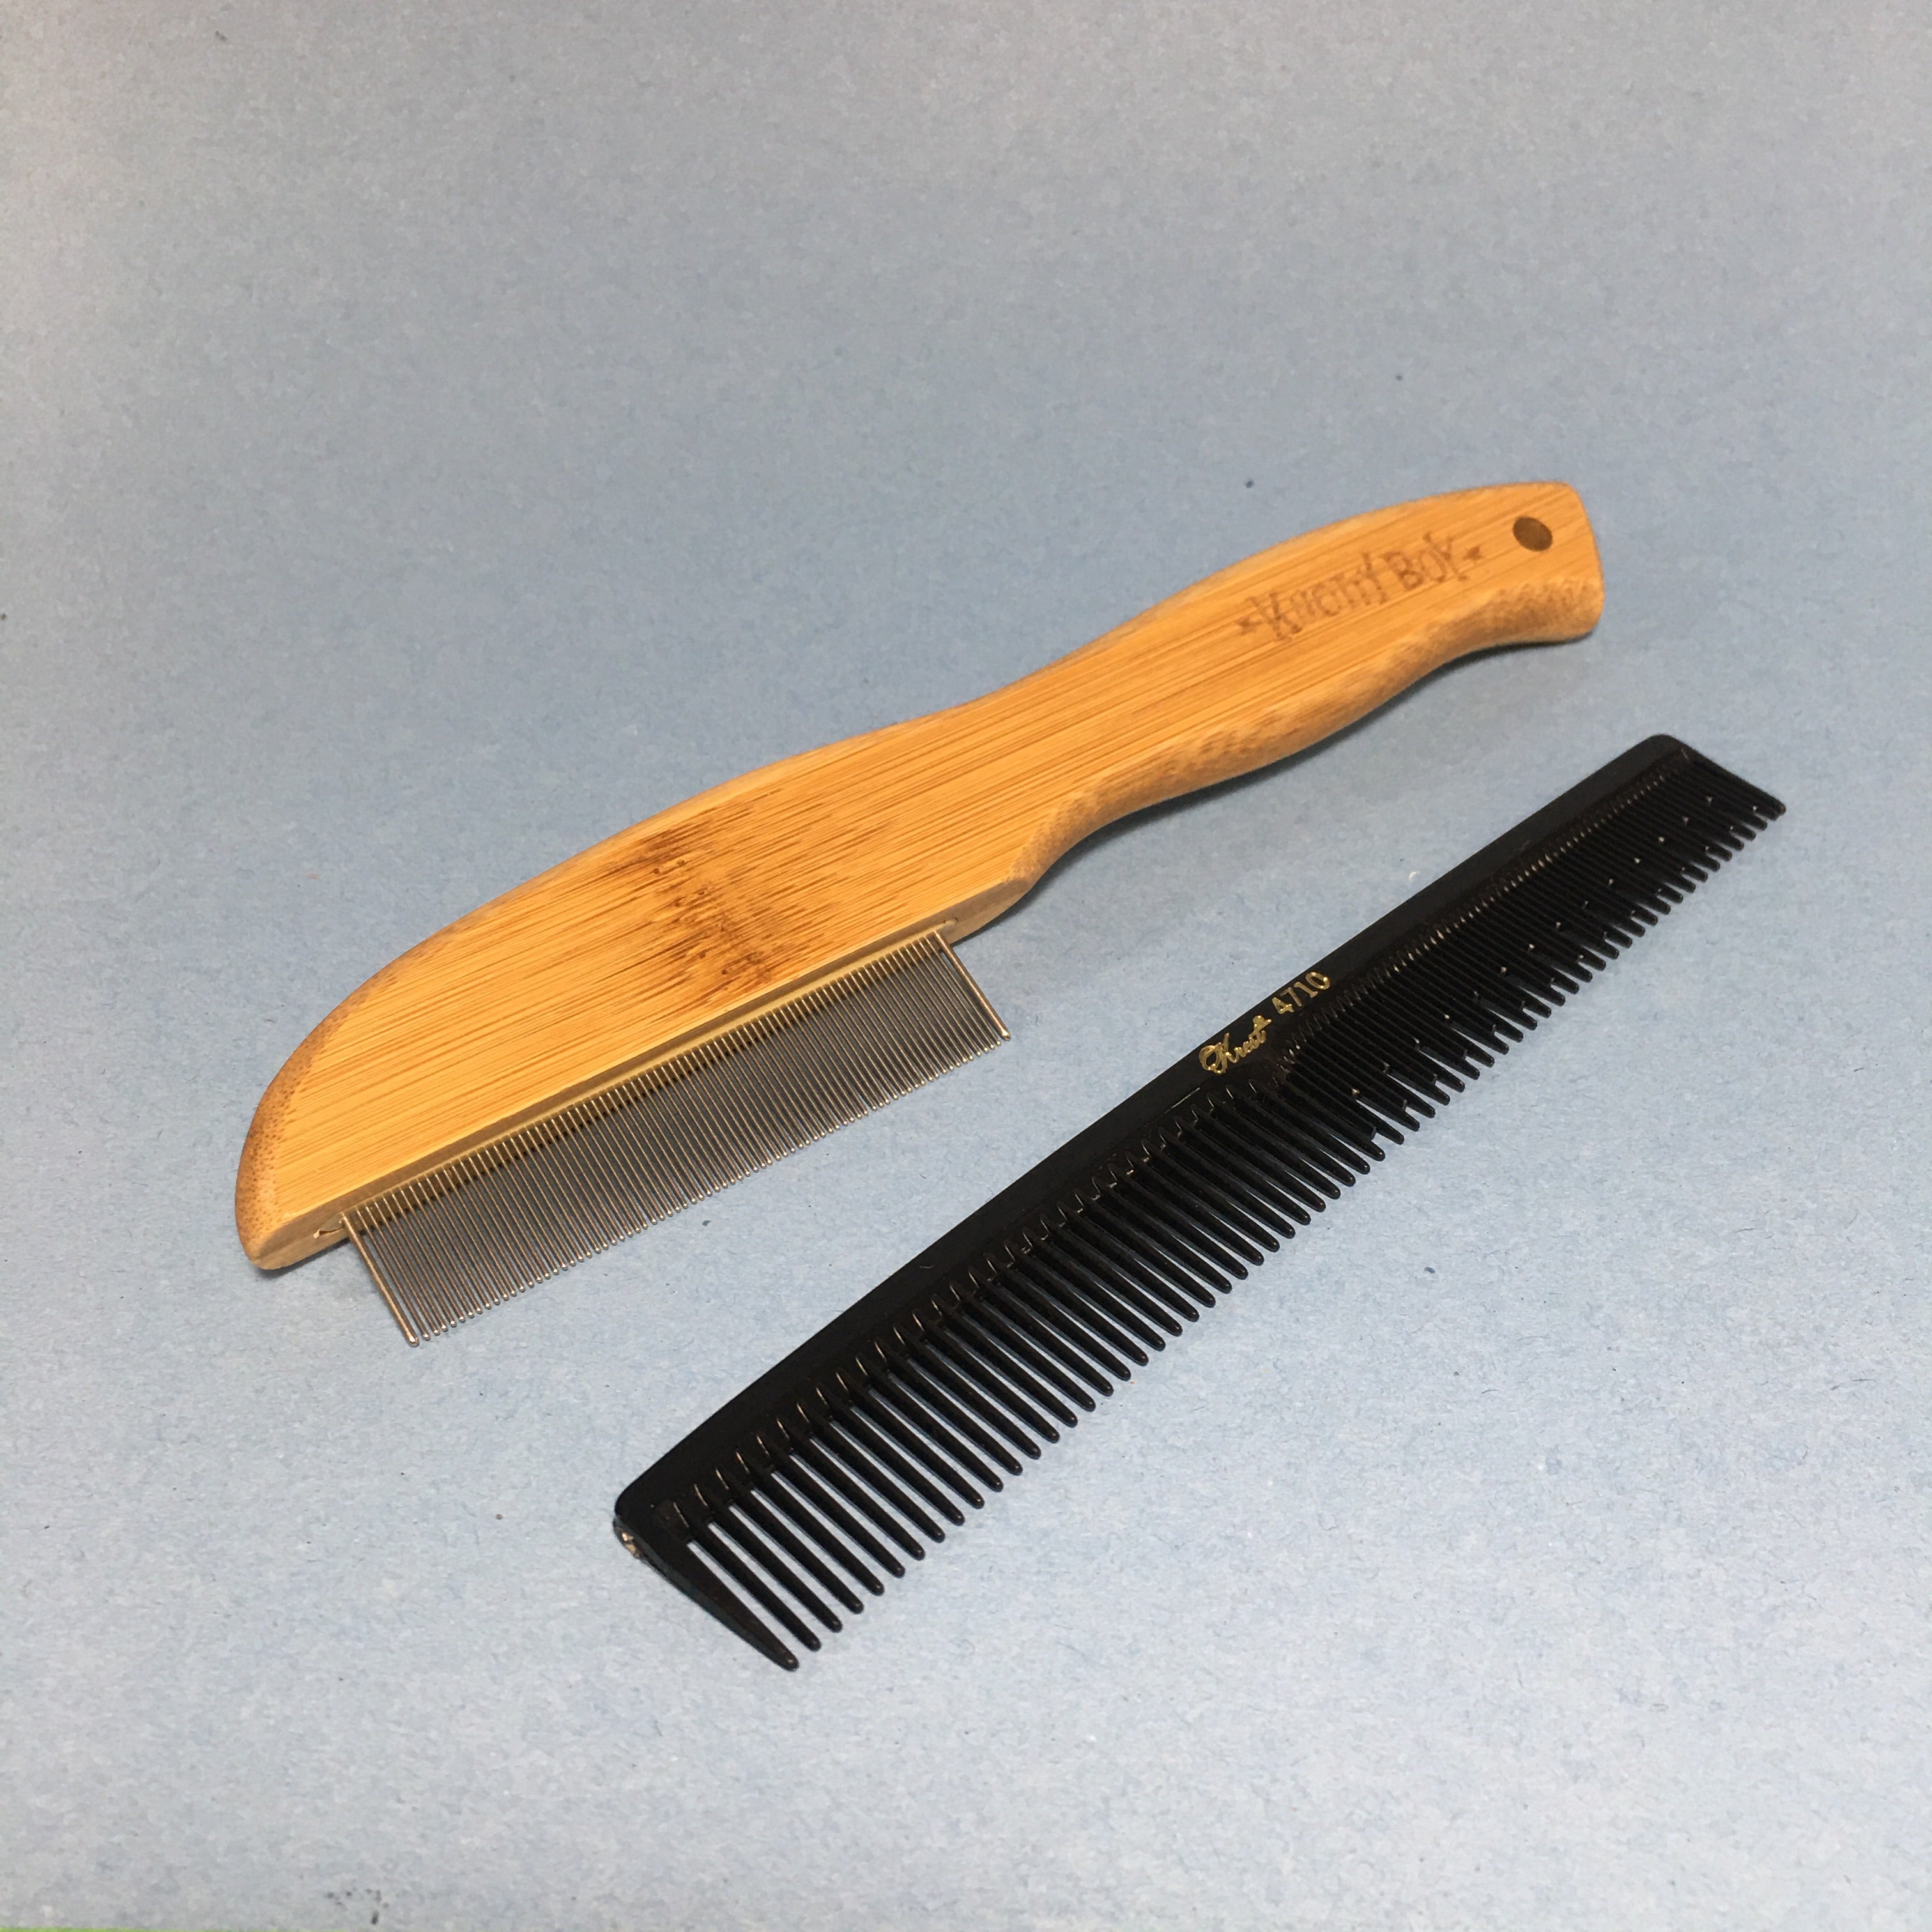 Want to buy a comb for your Dreads? Come to Dreadshop!